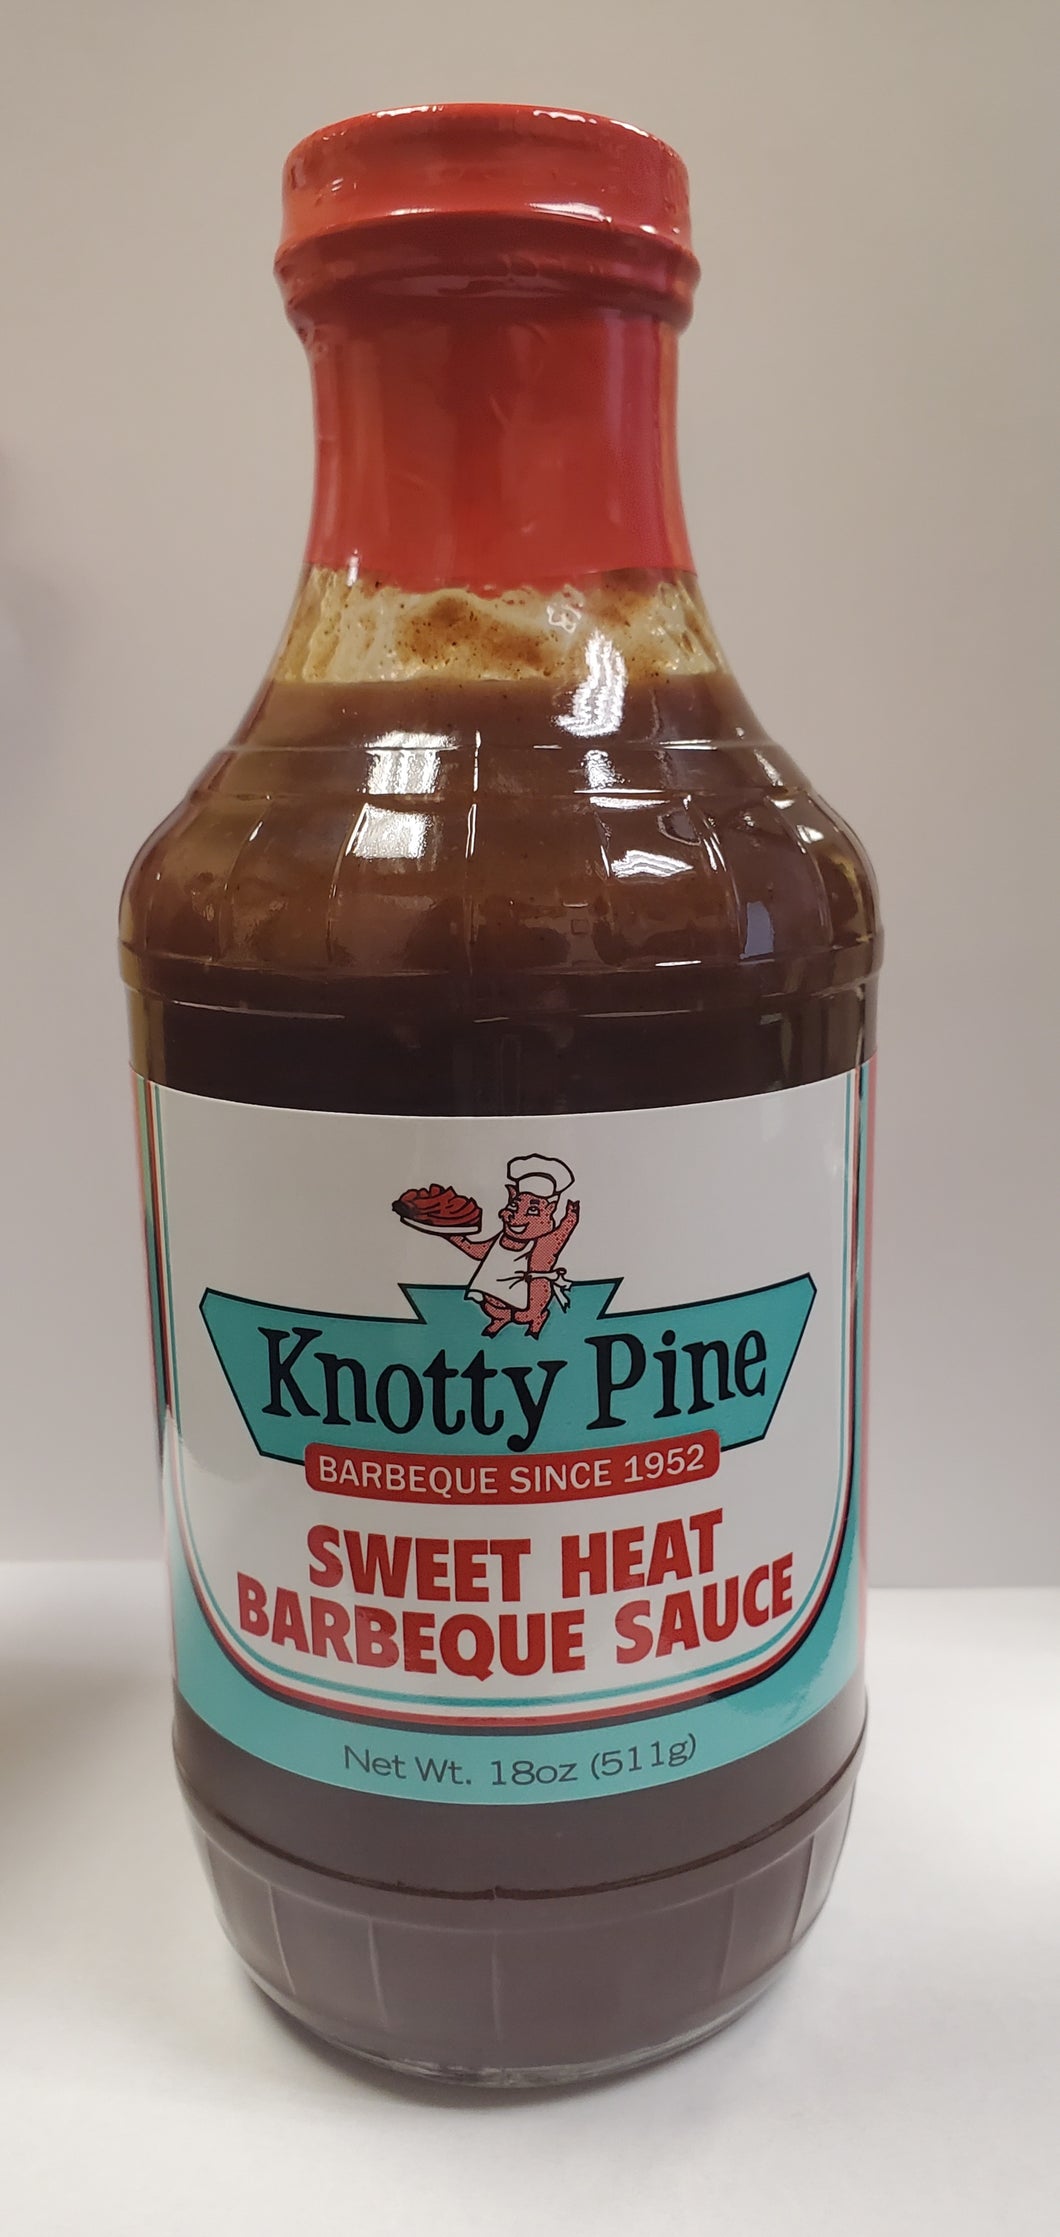 Knotty Pine Barbeque Sauce Sweet Heat